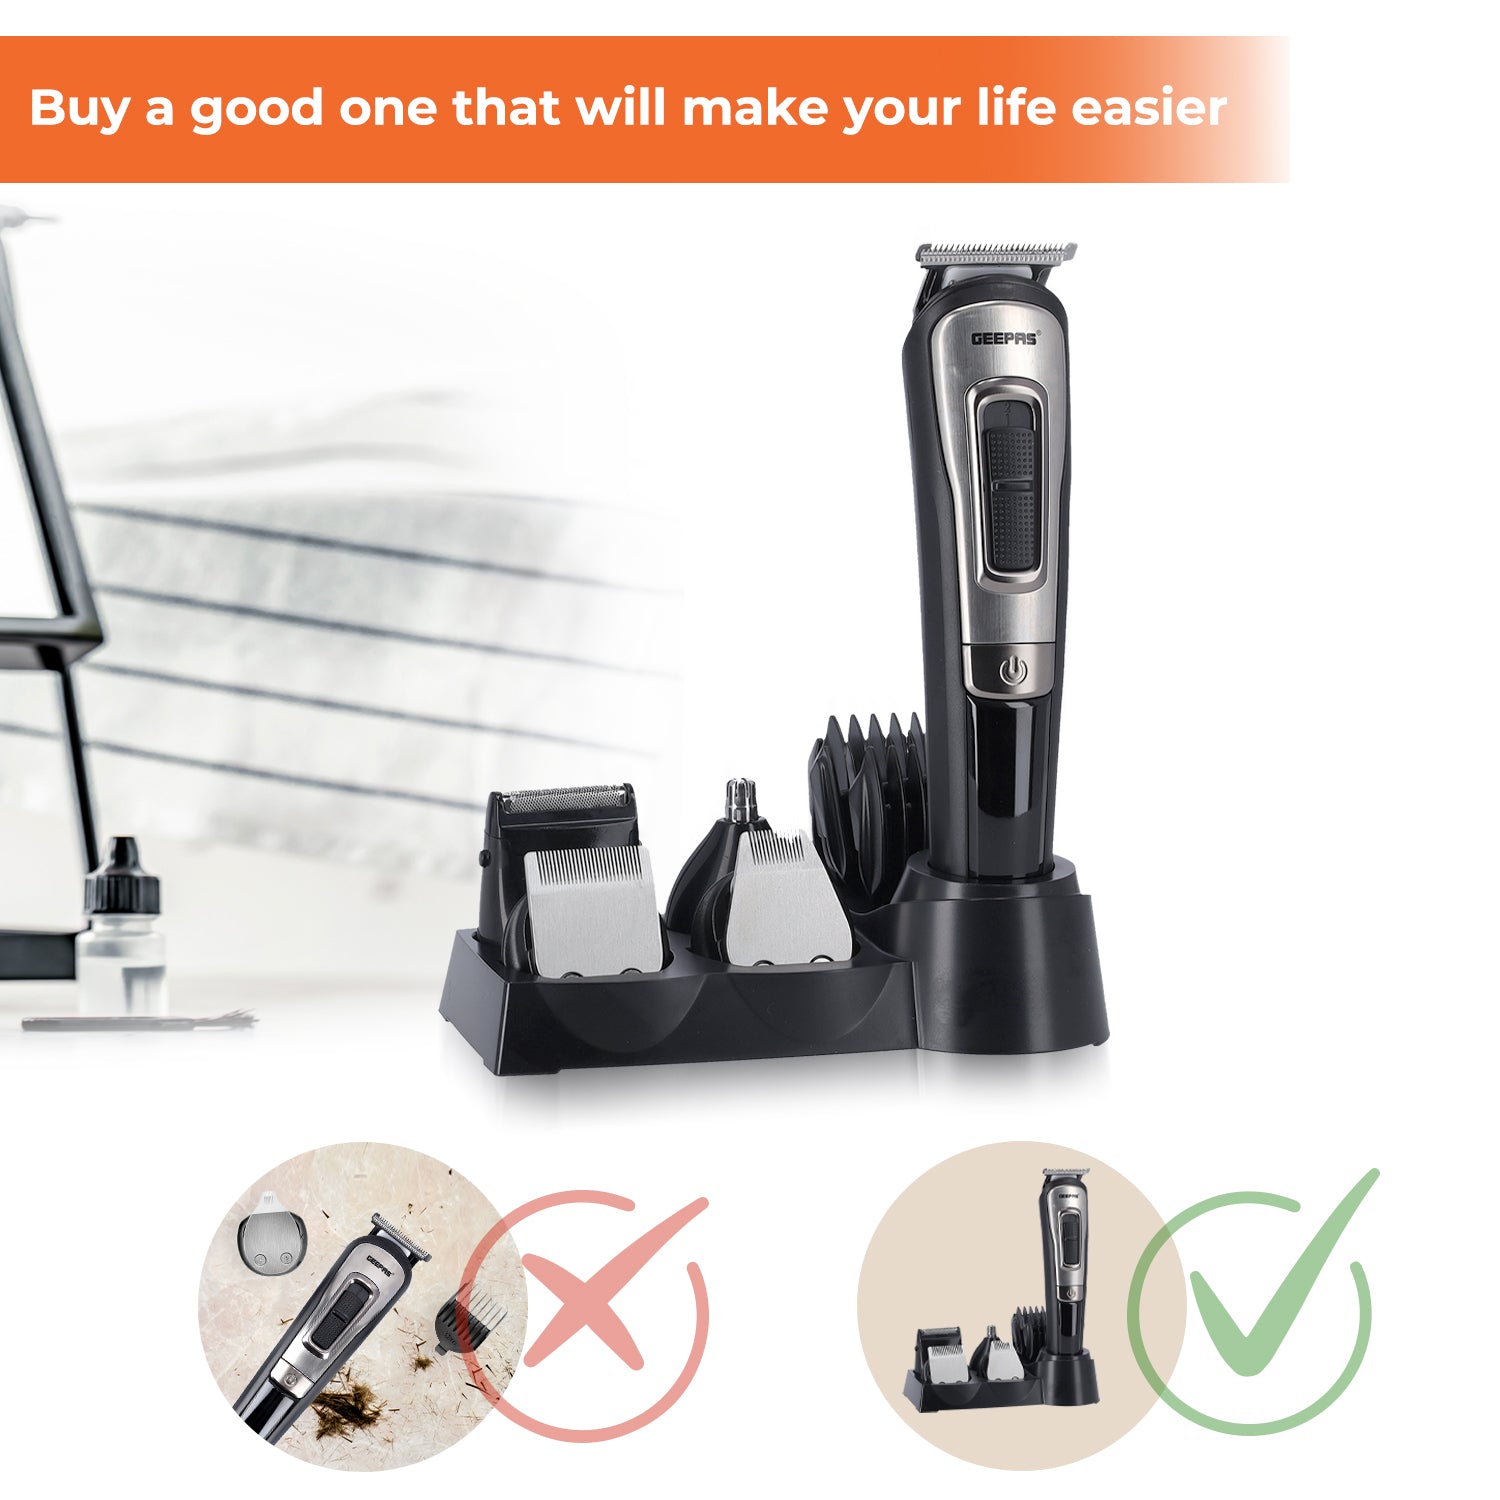 11-In-1 Men's Trimmer and Shaver Grooming Kit